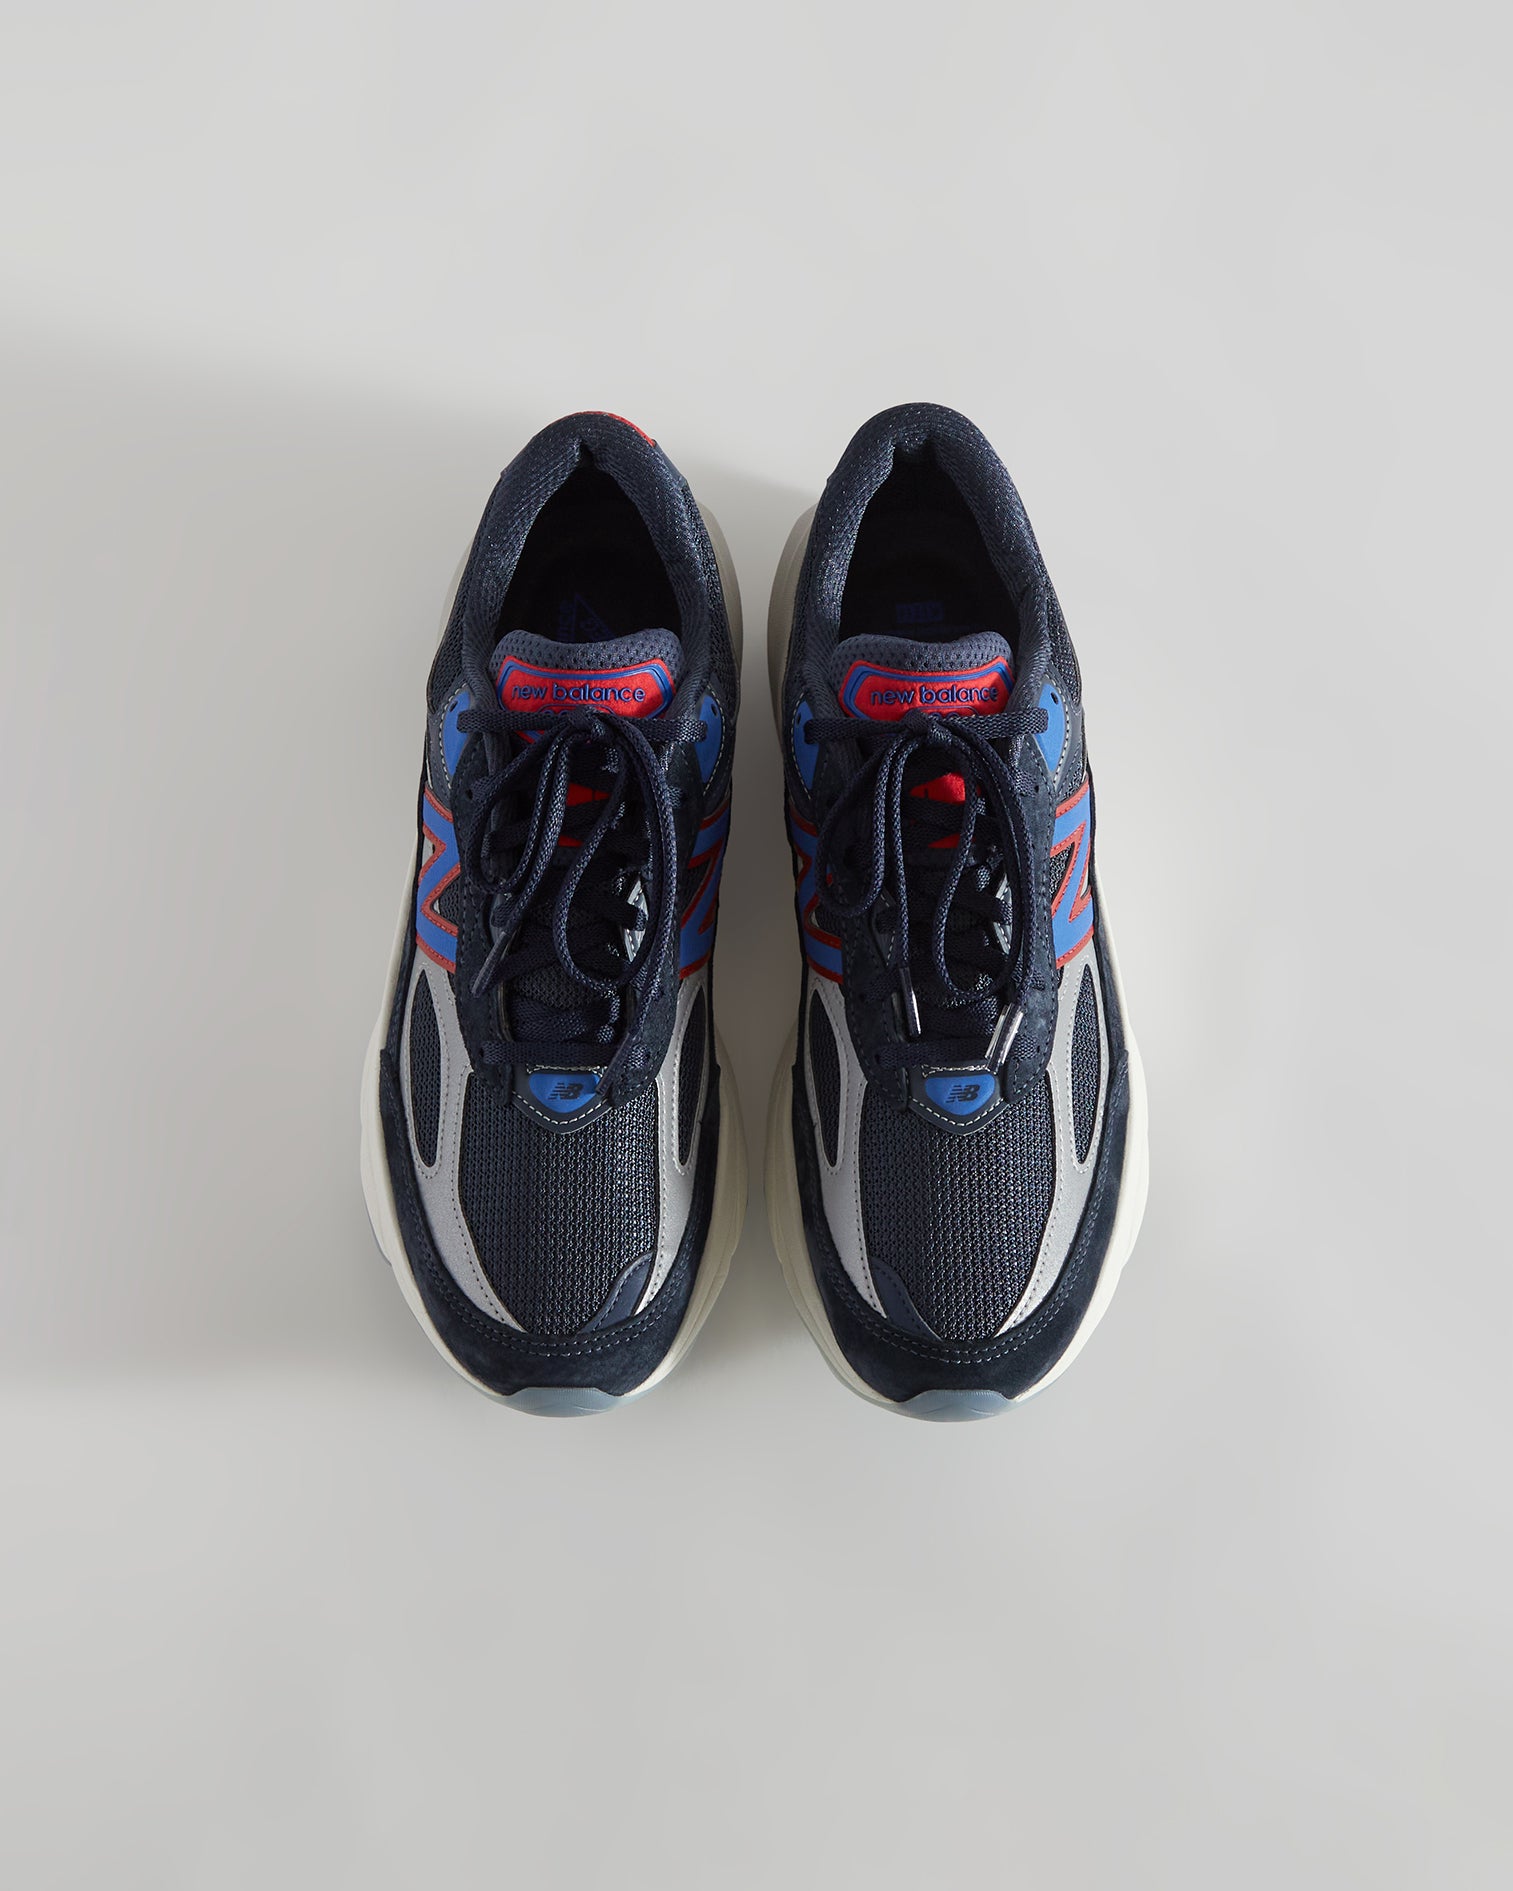 Ronnie Fieg & Madison Square Garden for New Balance – Kith